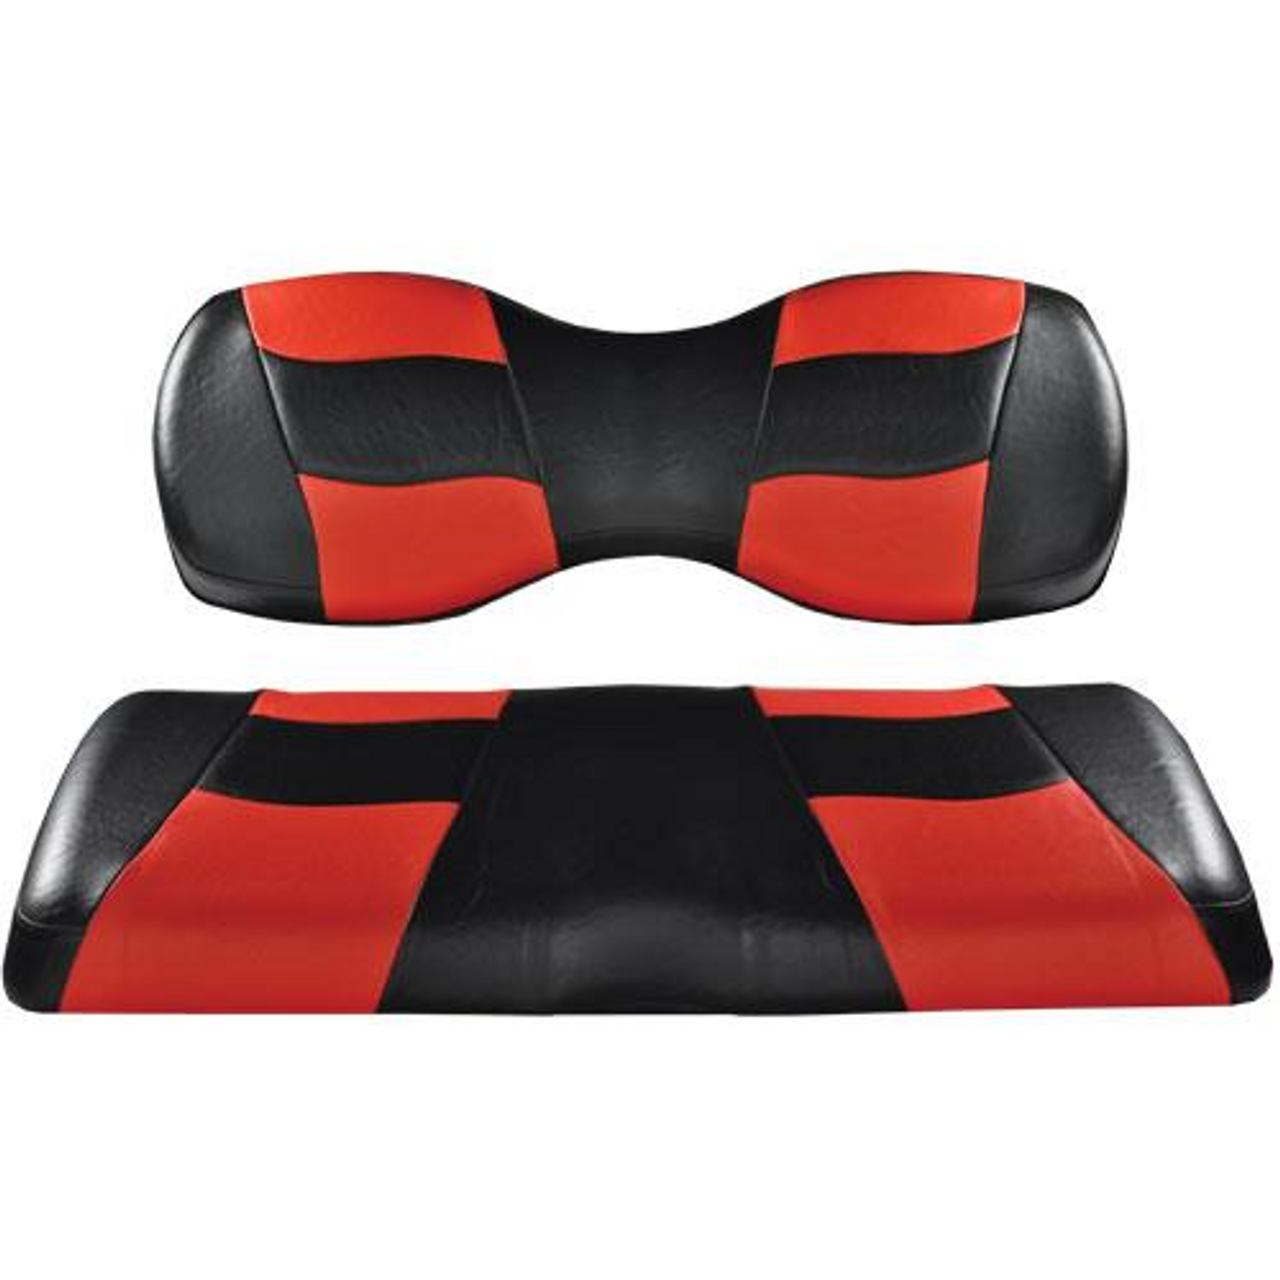 Deluxe Riptide Black/Red Two-Tone Rear Cushion Set G250/300, 10-168P